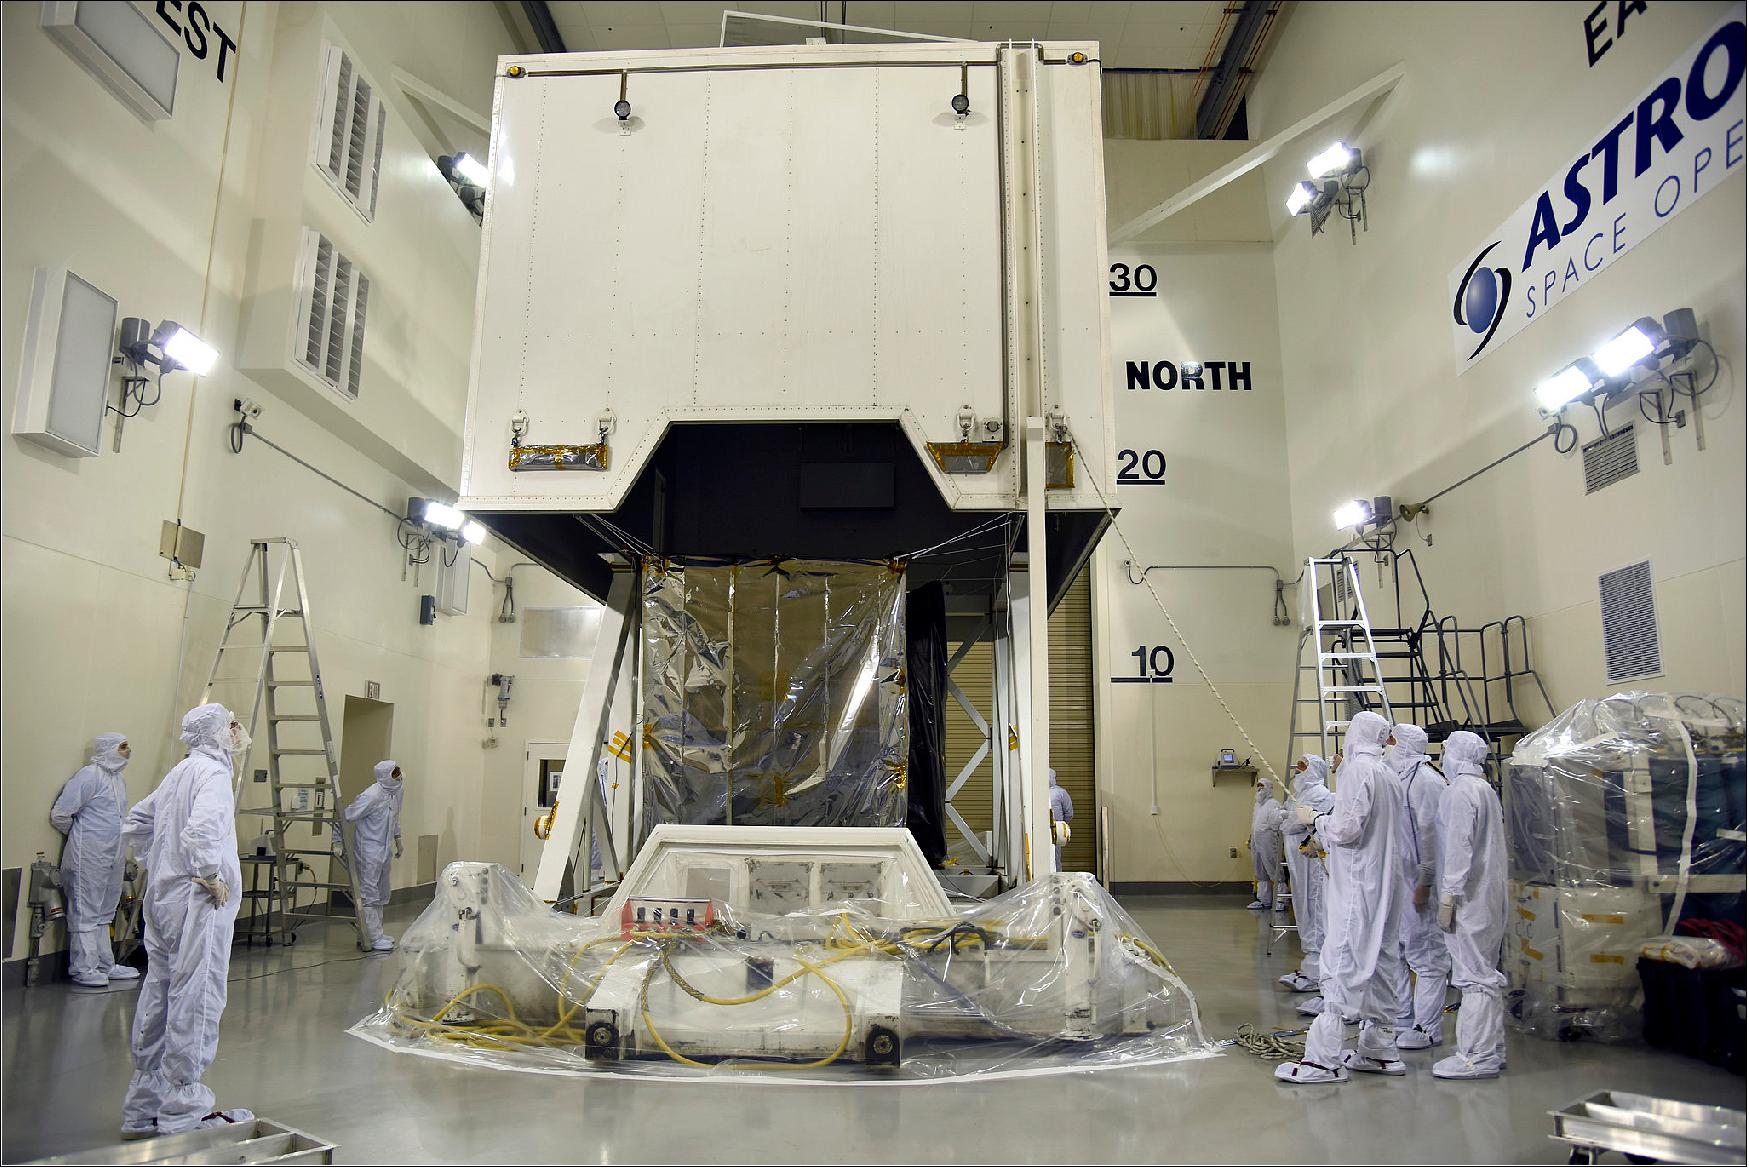 Figure 4: ICESat-2 is uncrated inside the airlock of the Astrotech processing facility at Vandenberg Air Force Base in California, prior to a successful series of tests of the satellite and its instrument (image credit: USAF 30th Space Wing/Vanessa Valentine)